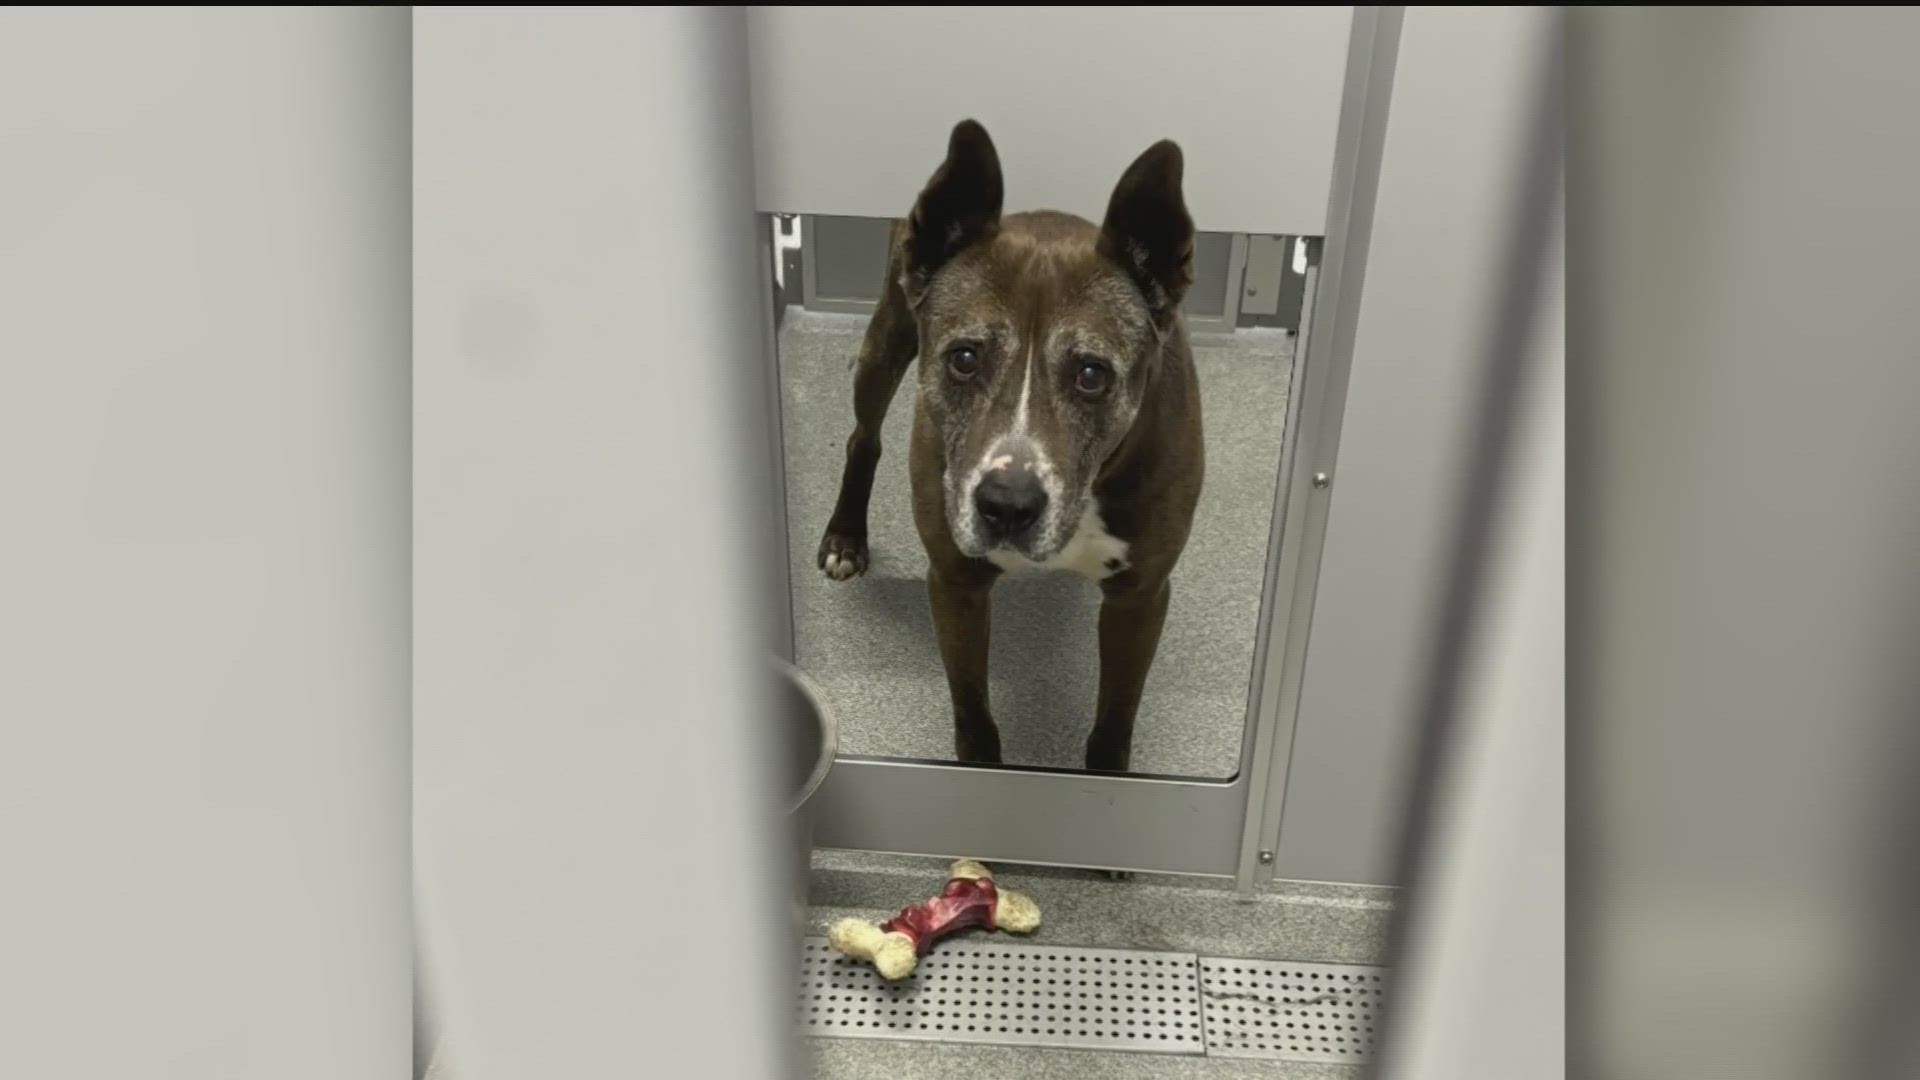 A new animal shelter opened up in Fayette County but days after opening, it's already getting criticism from the community.